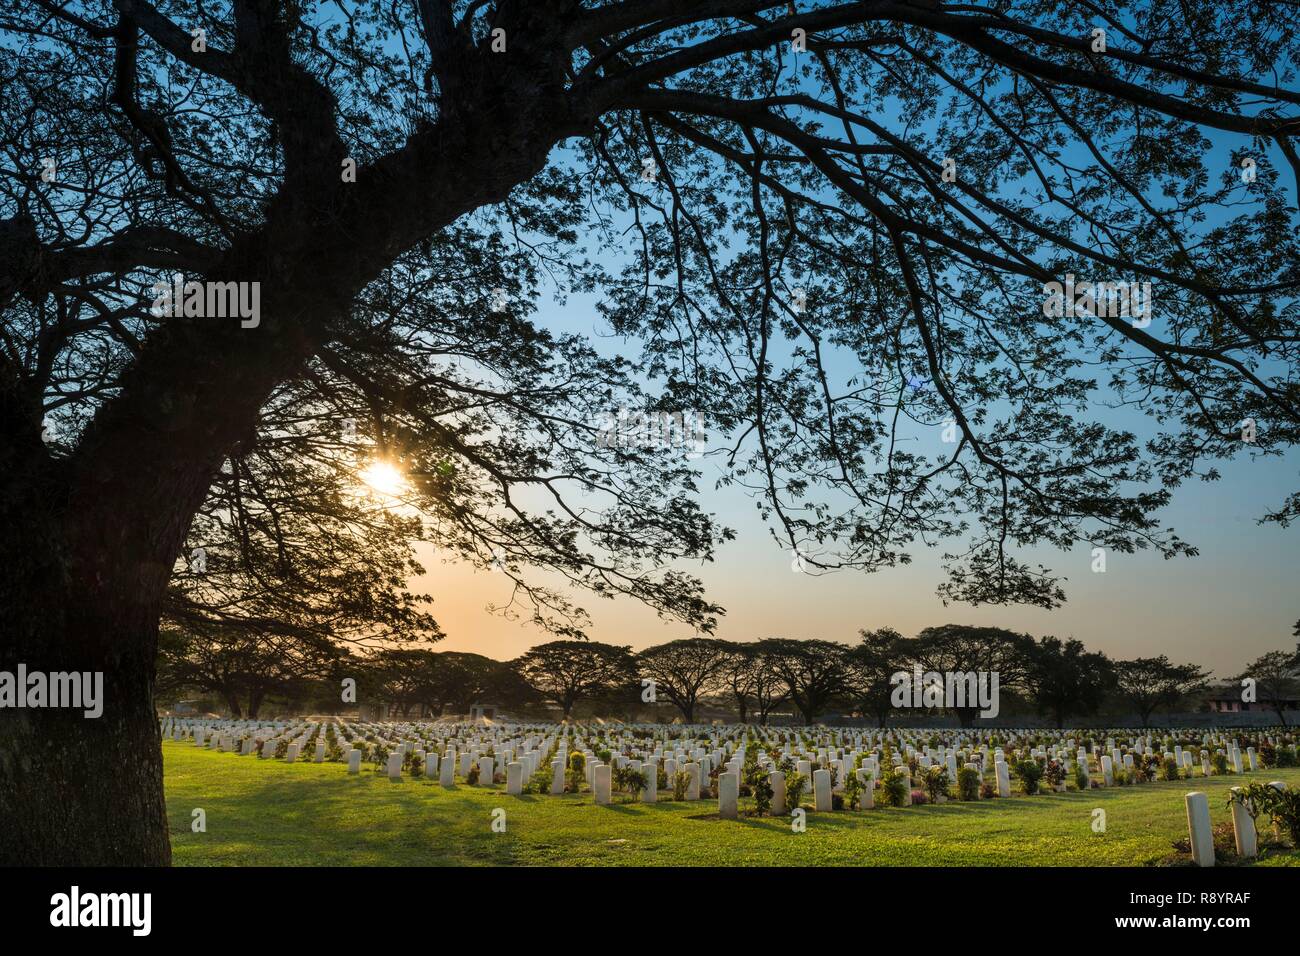 Papua-New-Guinea, National Capital District, Port Moresby, Bomana australian military cimetery, trees over the graves Stock Photo